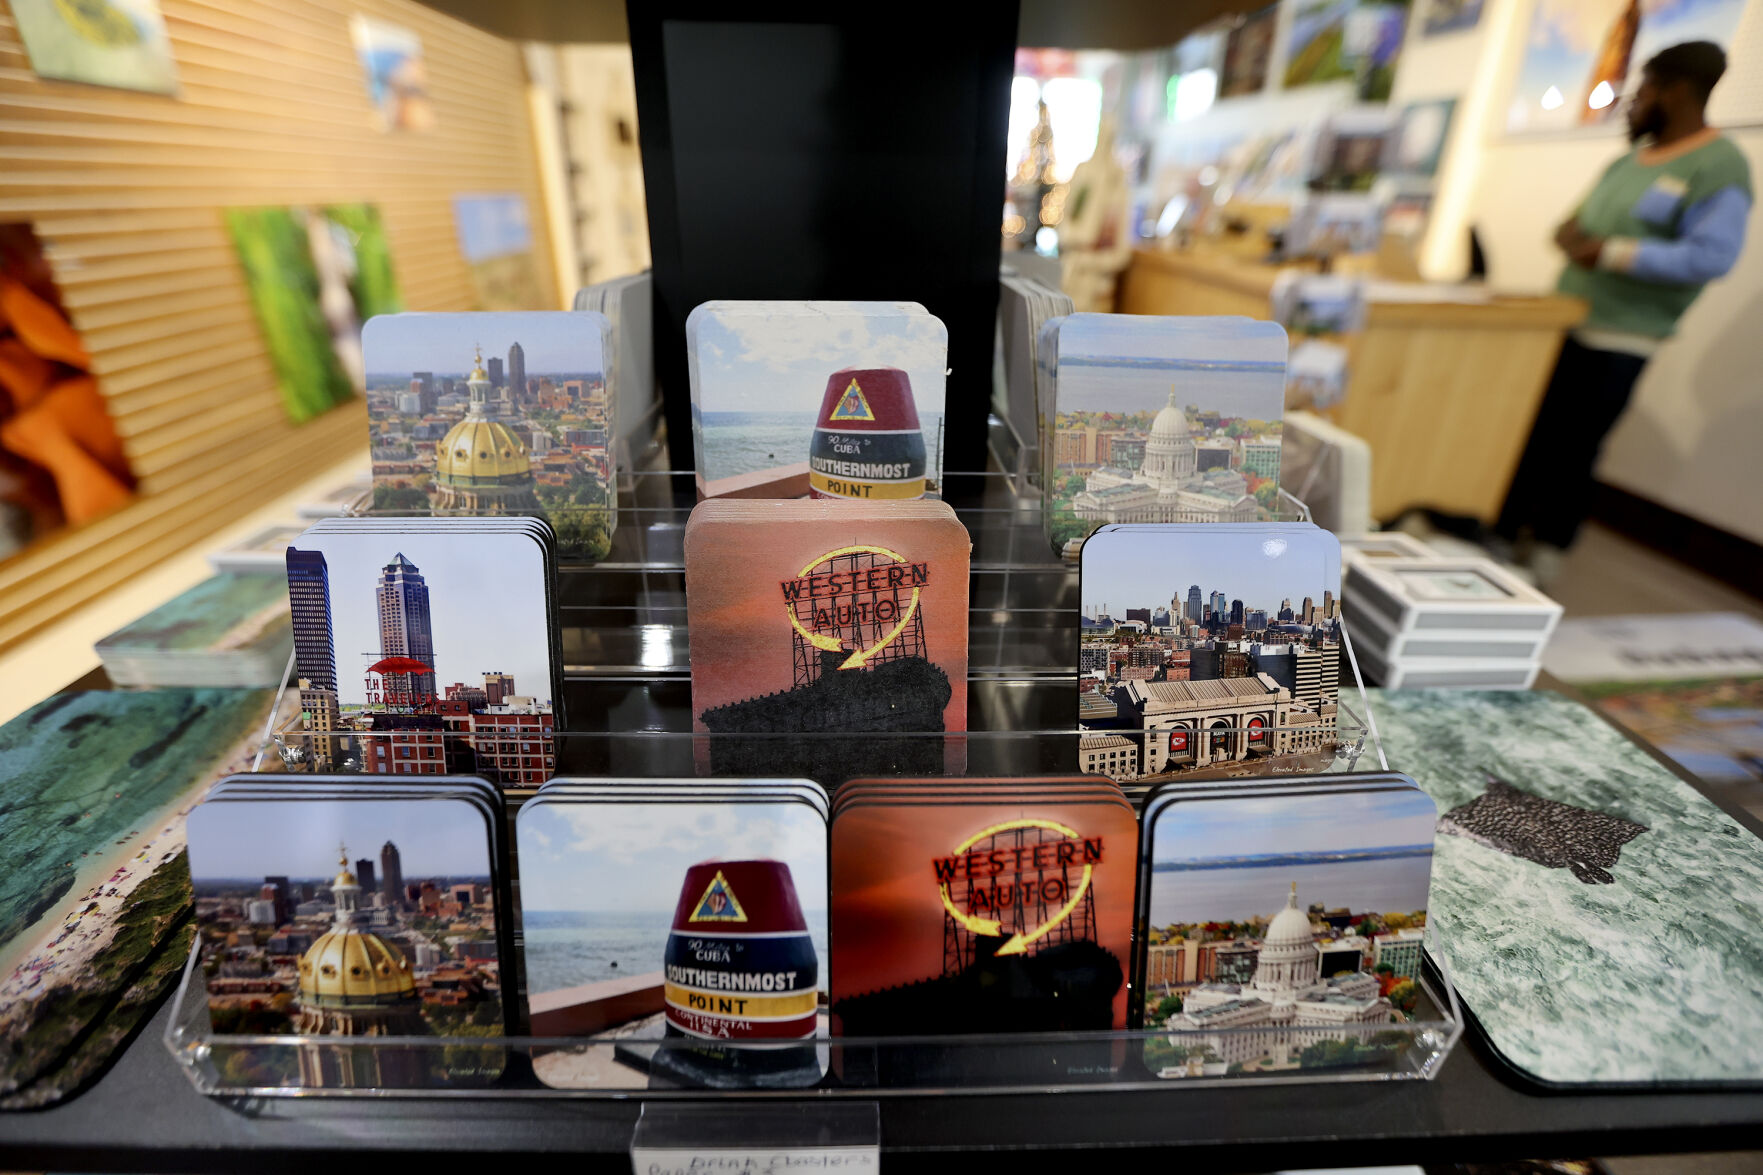 Some samples of gift items offered at Elevated Images in Dubuque.    PHOTO CREDIT: Dave Kettering